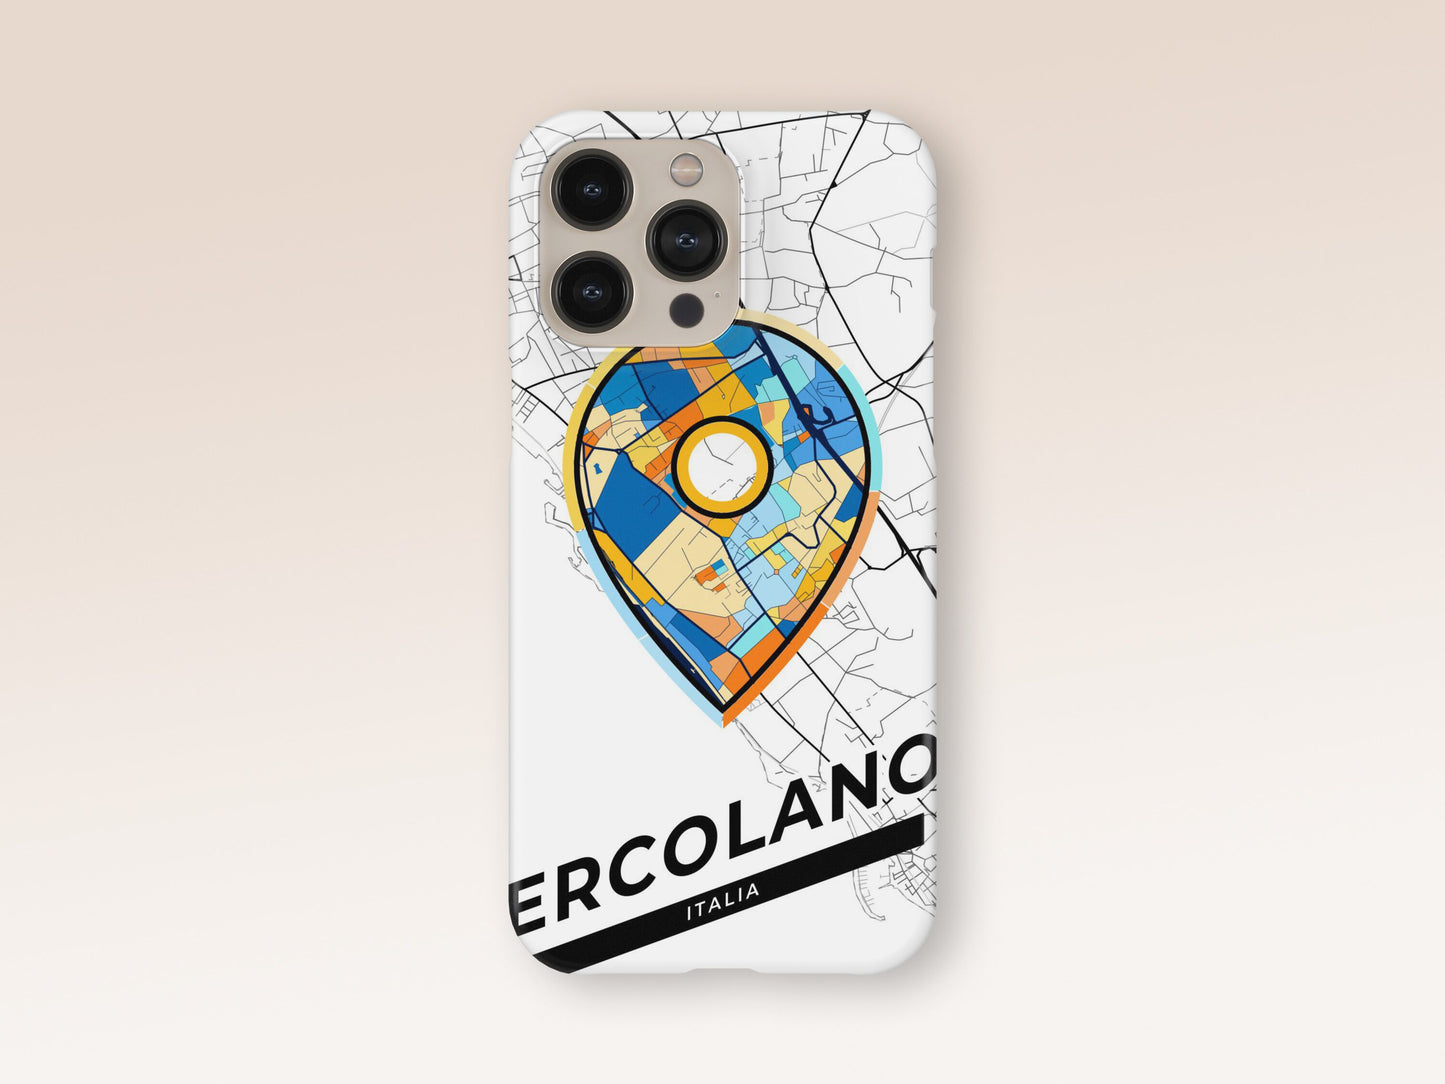 Ercolano Italy slim phone case with colorful icon. Birthday, wedding or housewarming gift. Couple match cases. 1